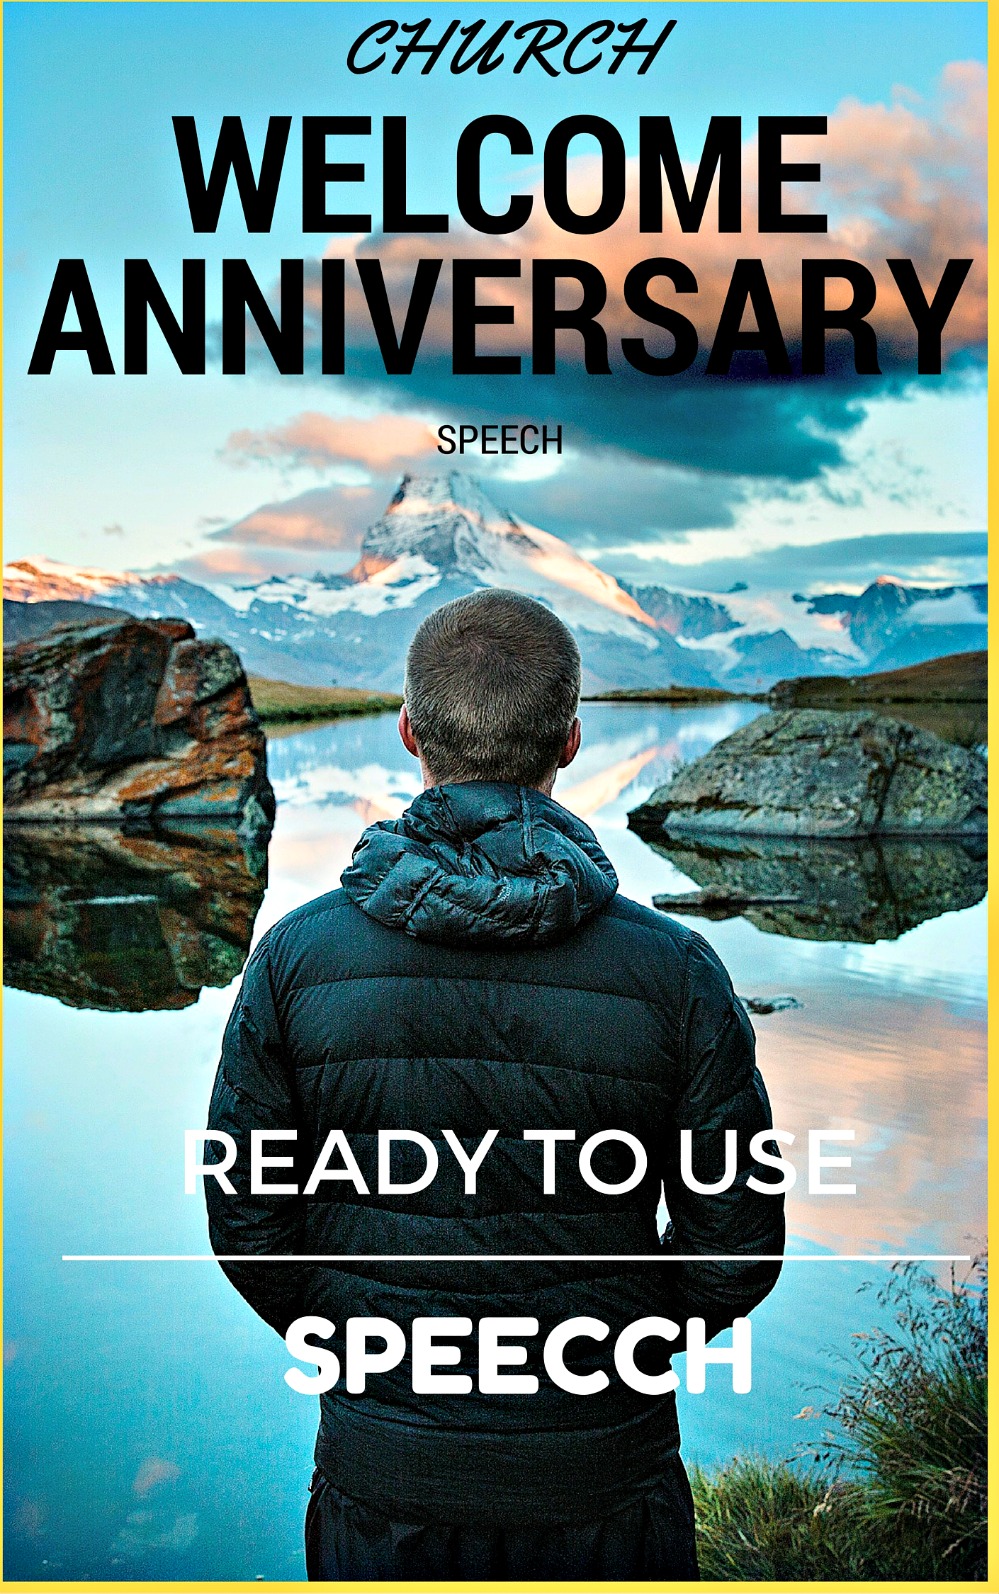 Looking for church anniversary welcome speeches,well here is a speech that we have prepared for you to downlaod and  can use during the occasion that is ahead of you.